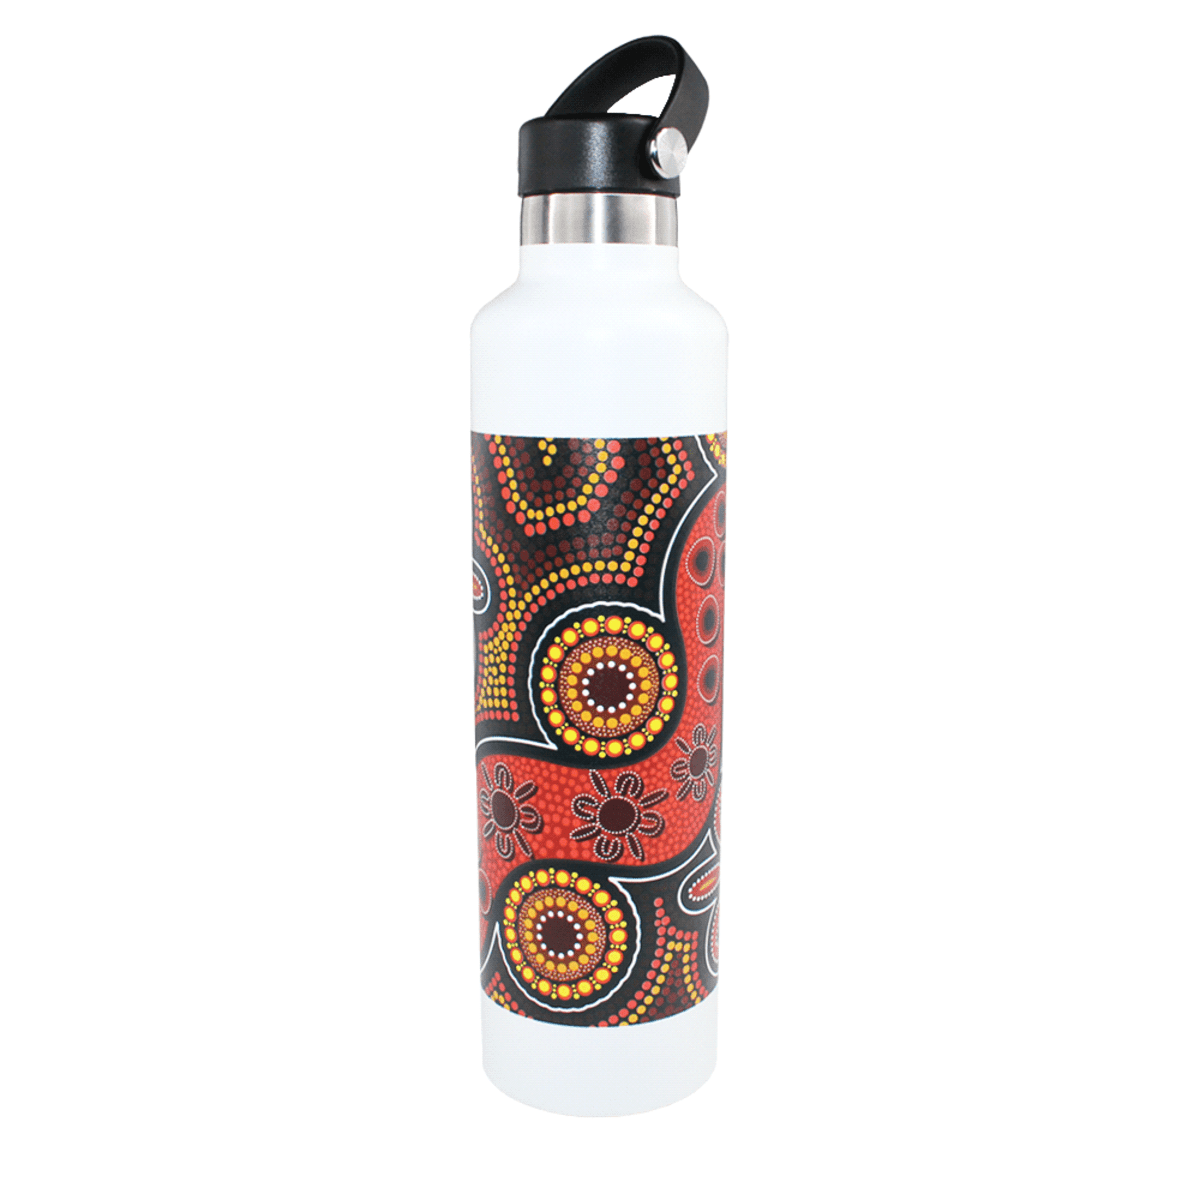 The Tank Stainless Steel Drink Bottle with Rotary Digital Print - 1L